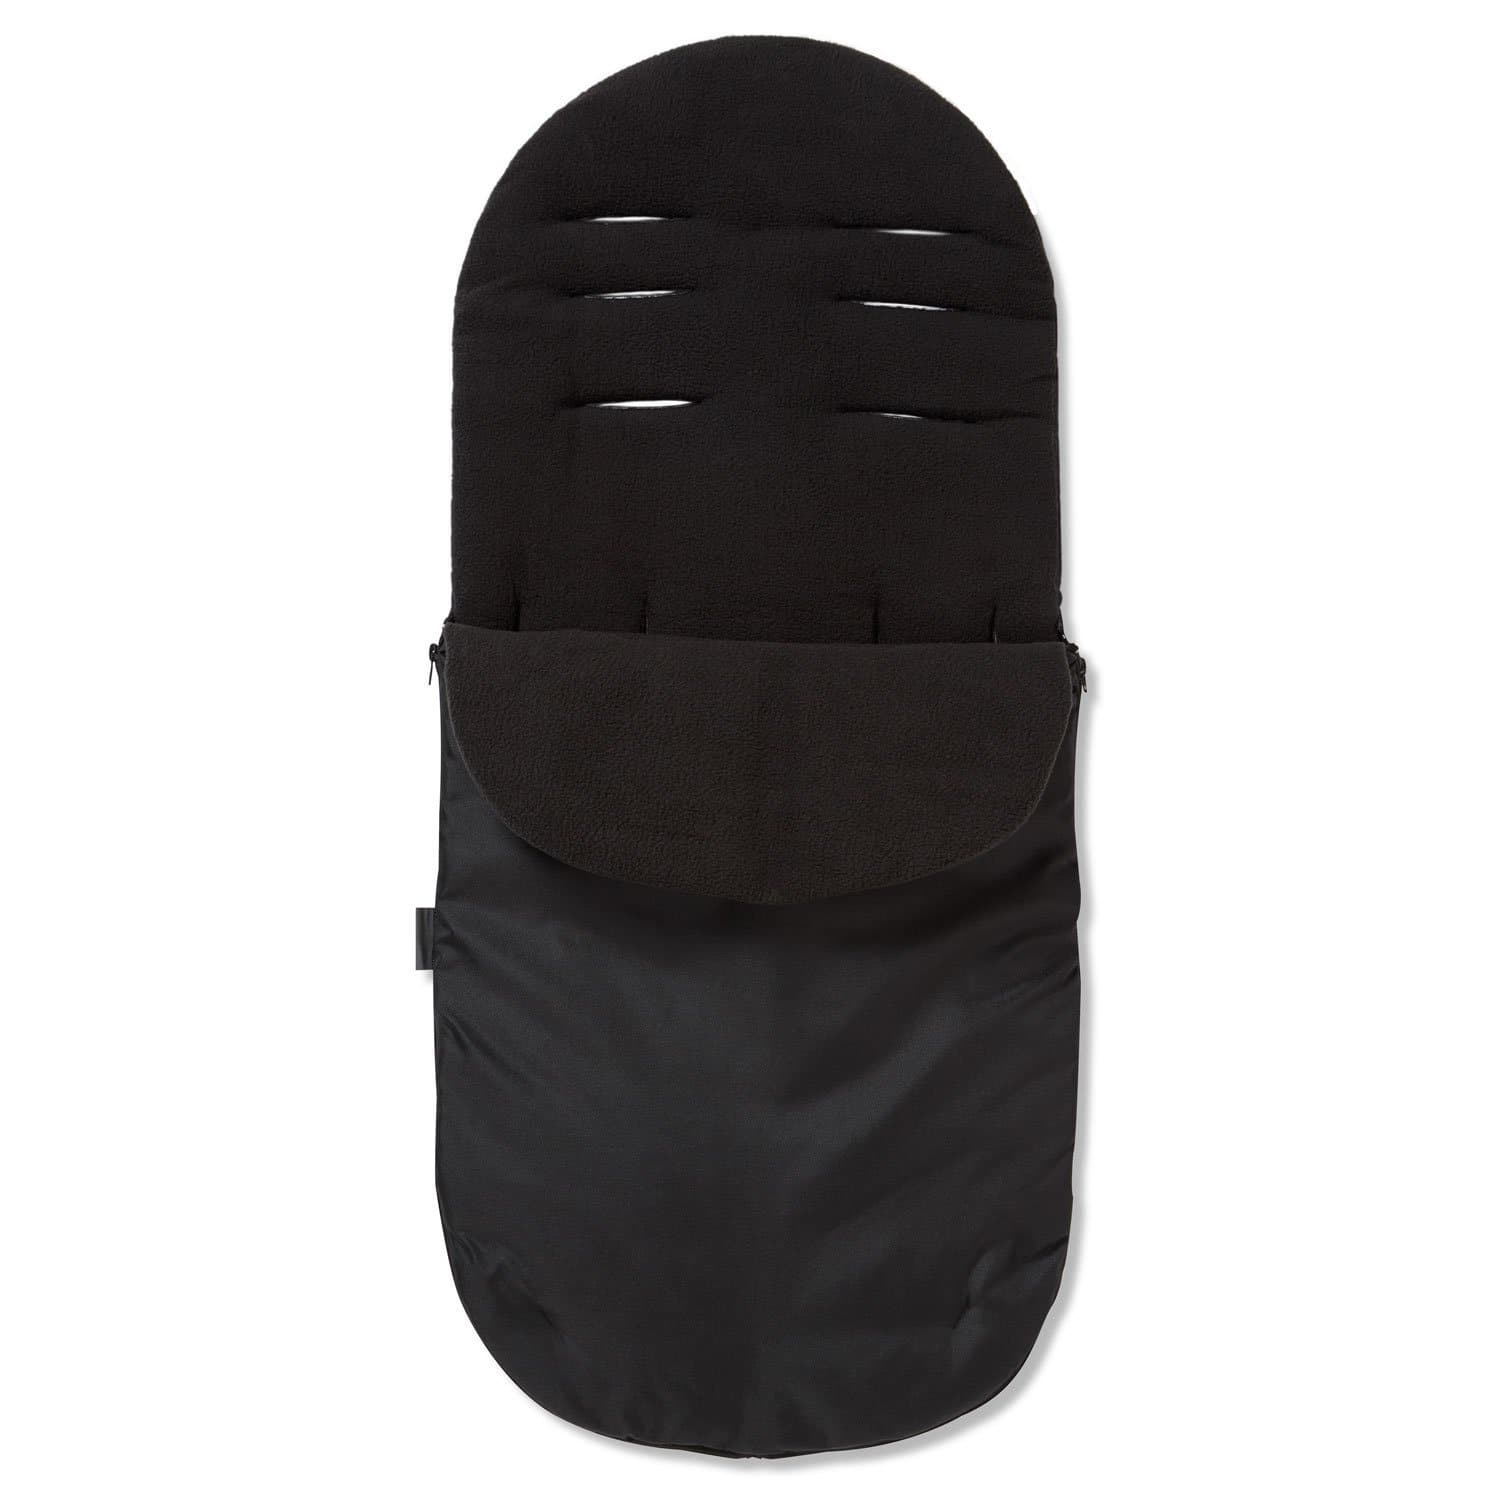 Footmuff / Cosy Toes Compatible with Pericles - Black / Fits All Models | For Your Little One